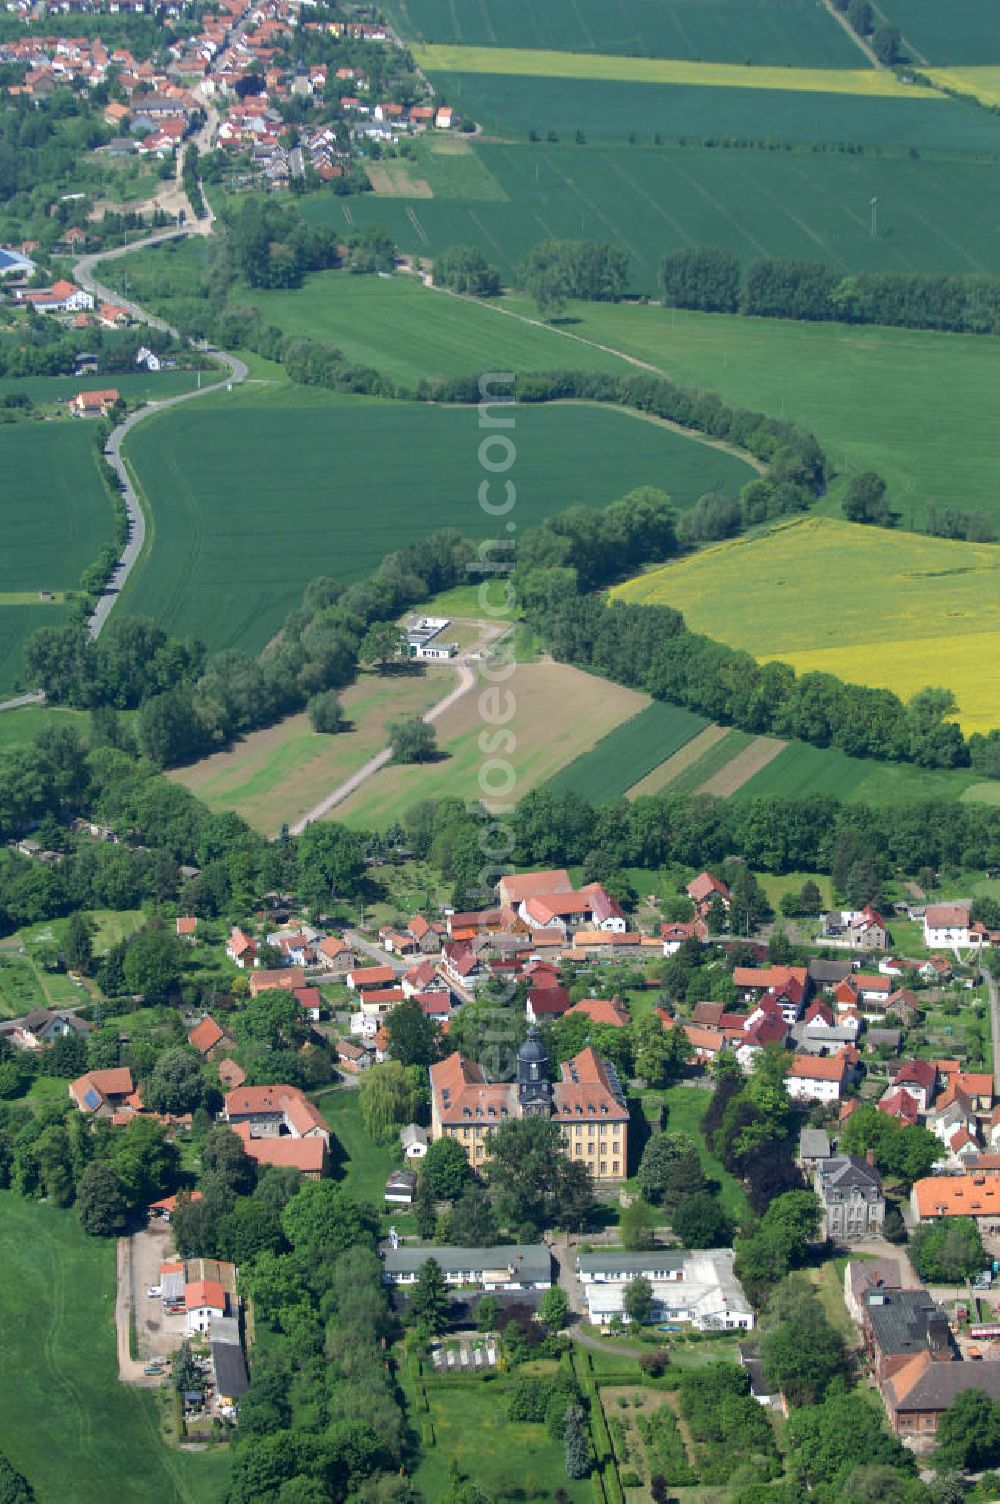 Aerial photograph Friedrichswerth - Village resp. small town Friedrichswerth with the castle in Thuringia